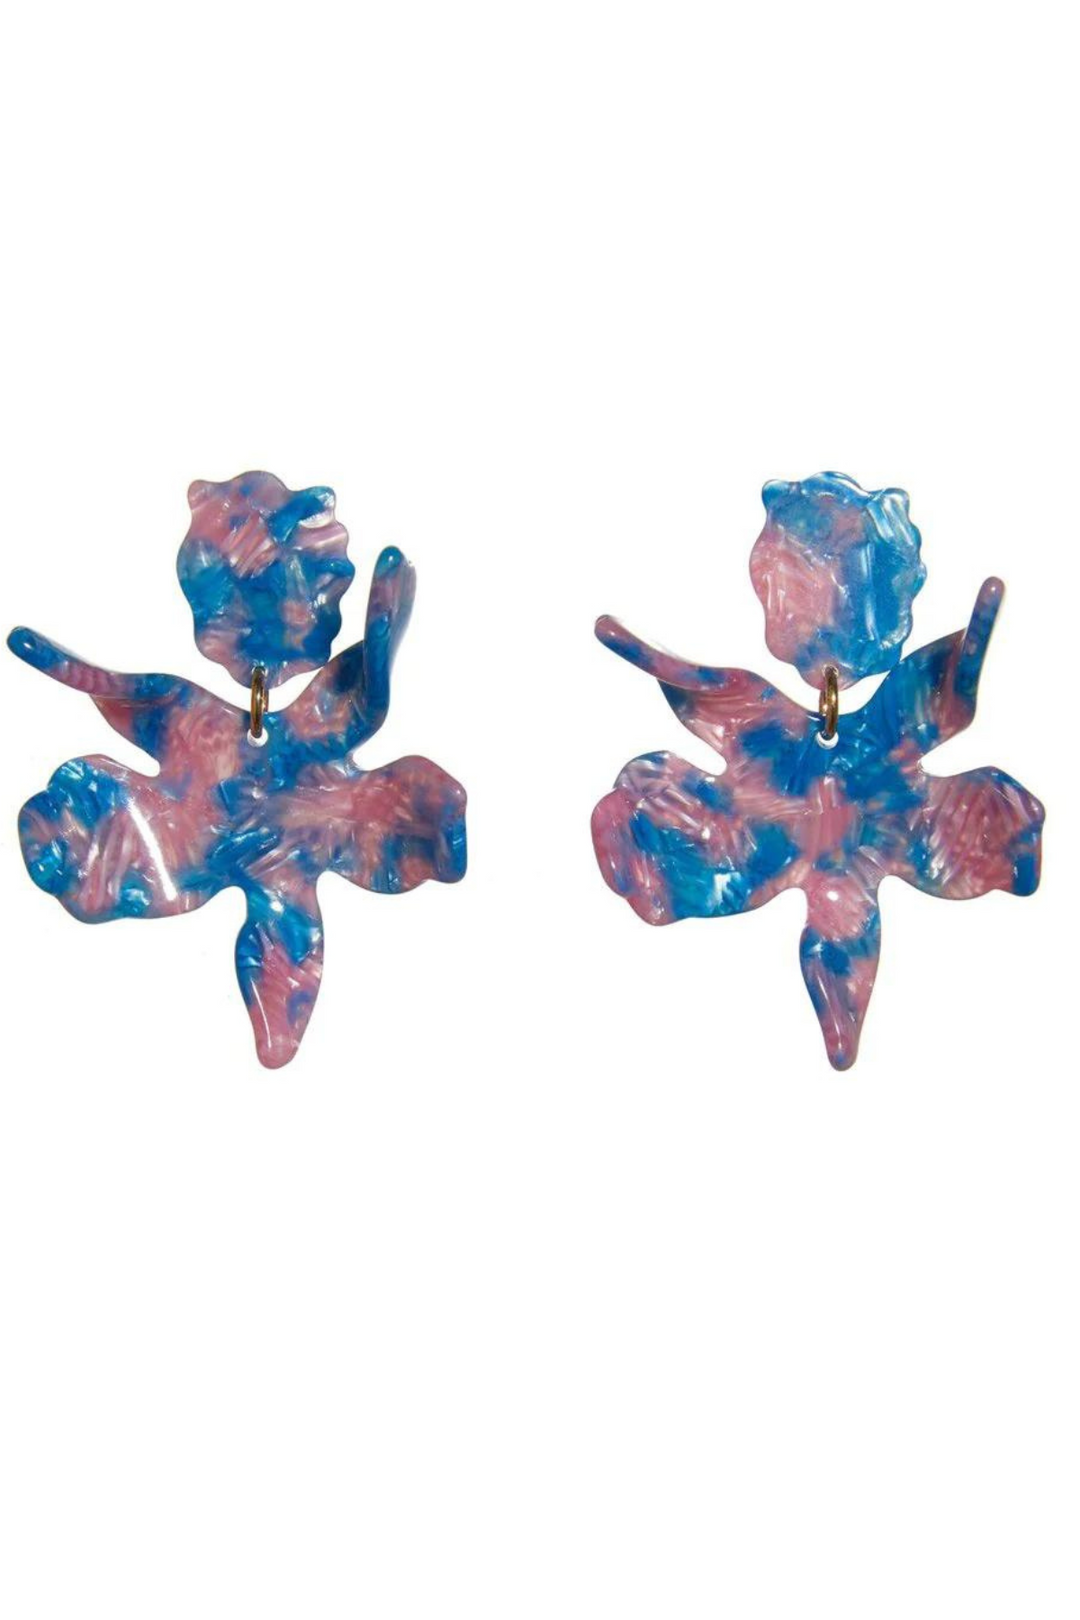 LELE SADOUGHI: Cotton Candy Small Paper Lily Earrings